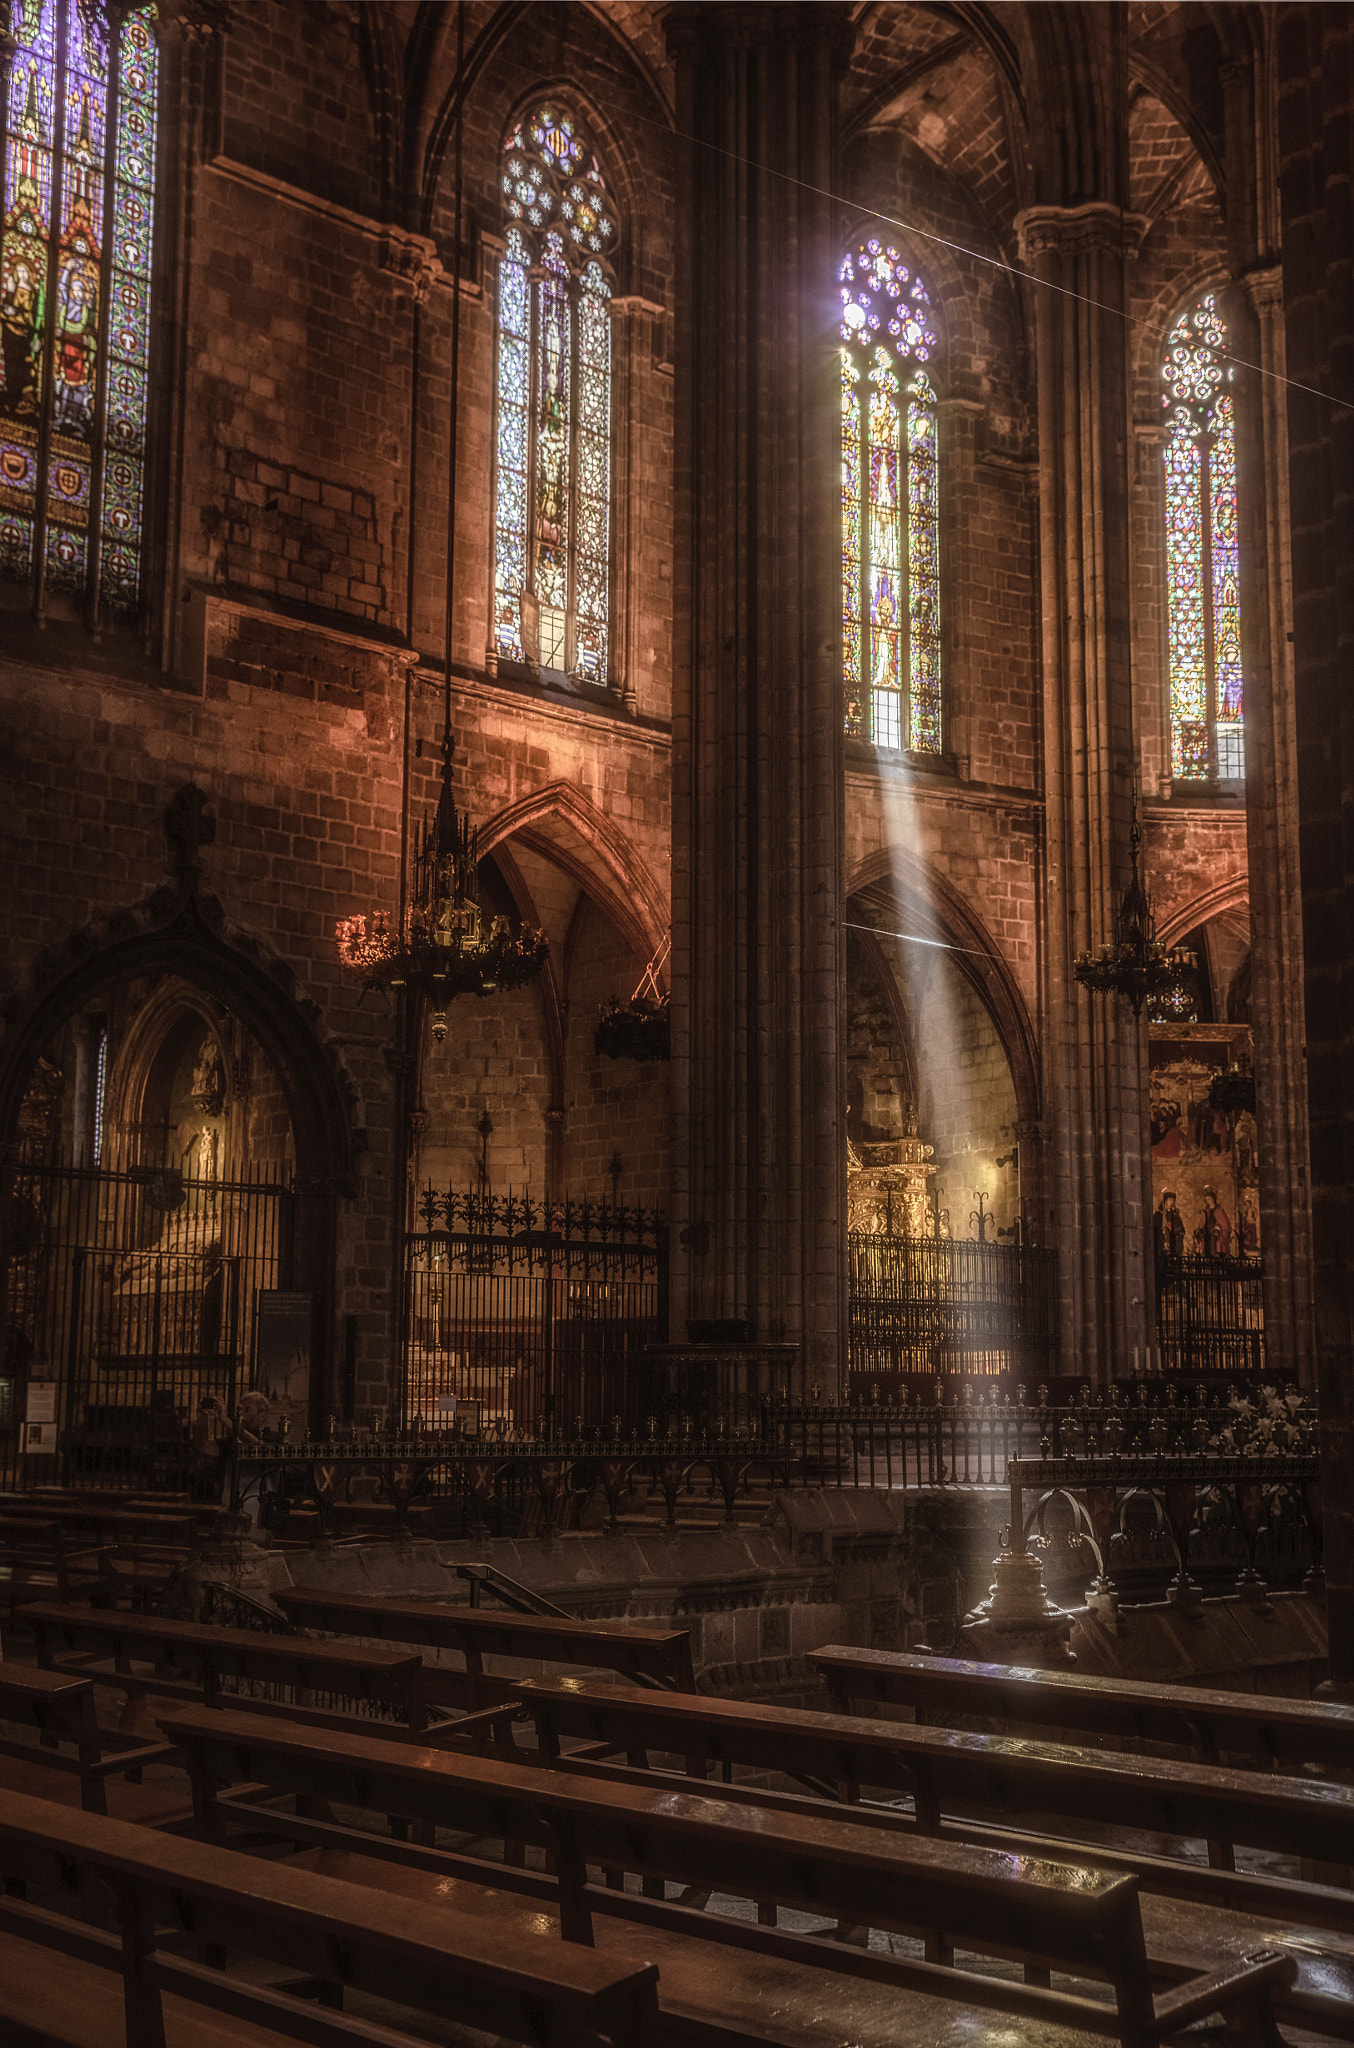 Sony a7 II + Tamron SP 24-70mm F2.8 Di VC USD sample photo. Lightstudy catedral de barcelona photography